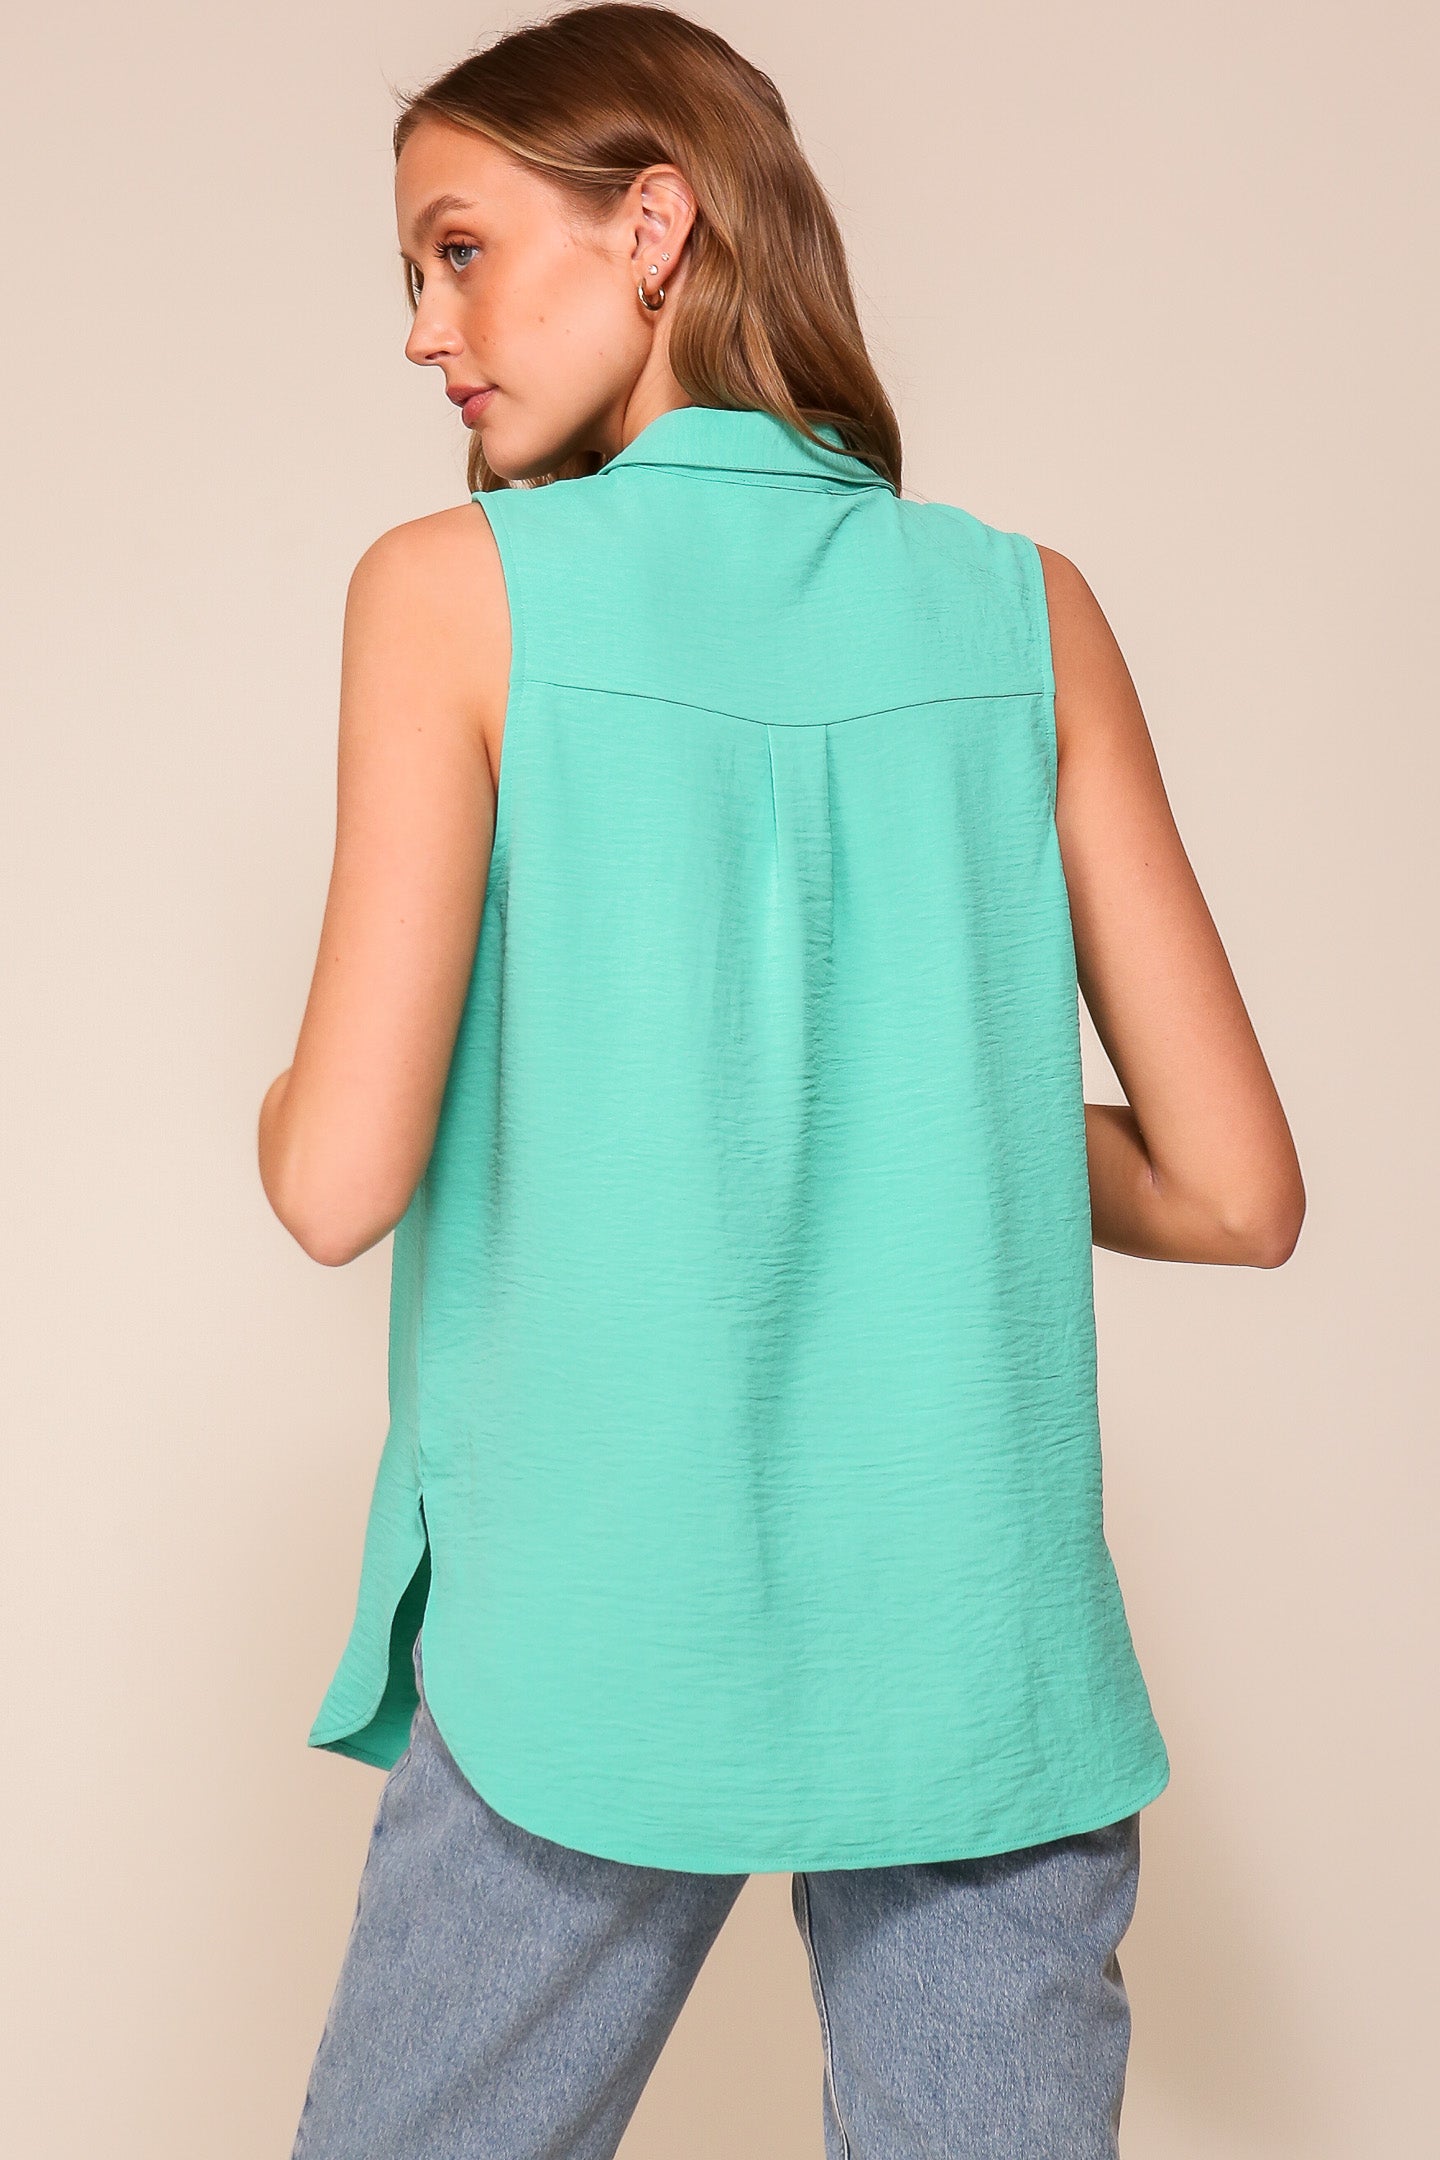 Back view of Timing (WN9713) women's Sleeveless Collared V-Neck Top with Chest Pocket and Flared Silhouette in Jade Green